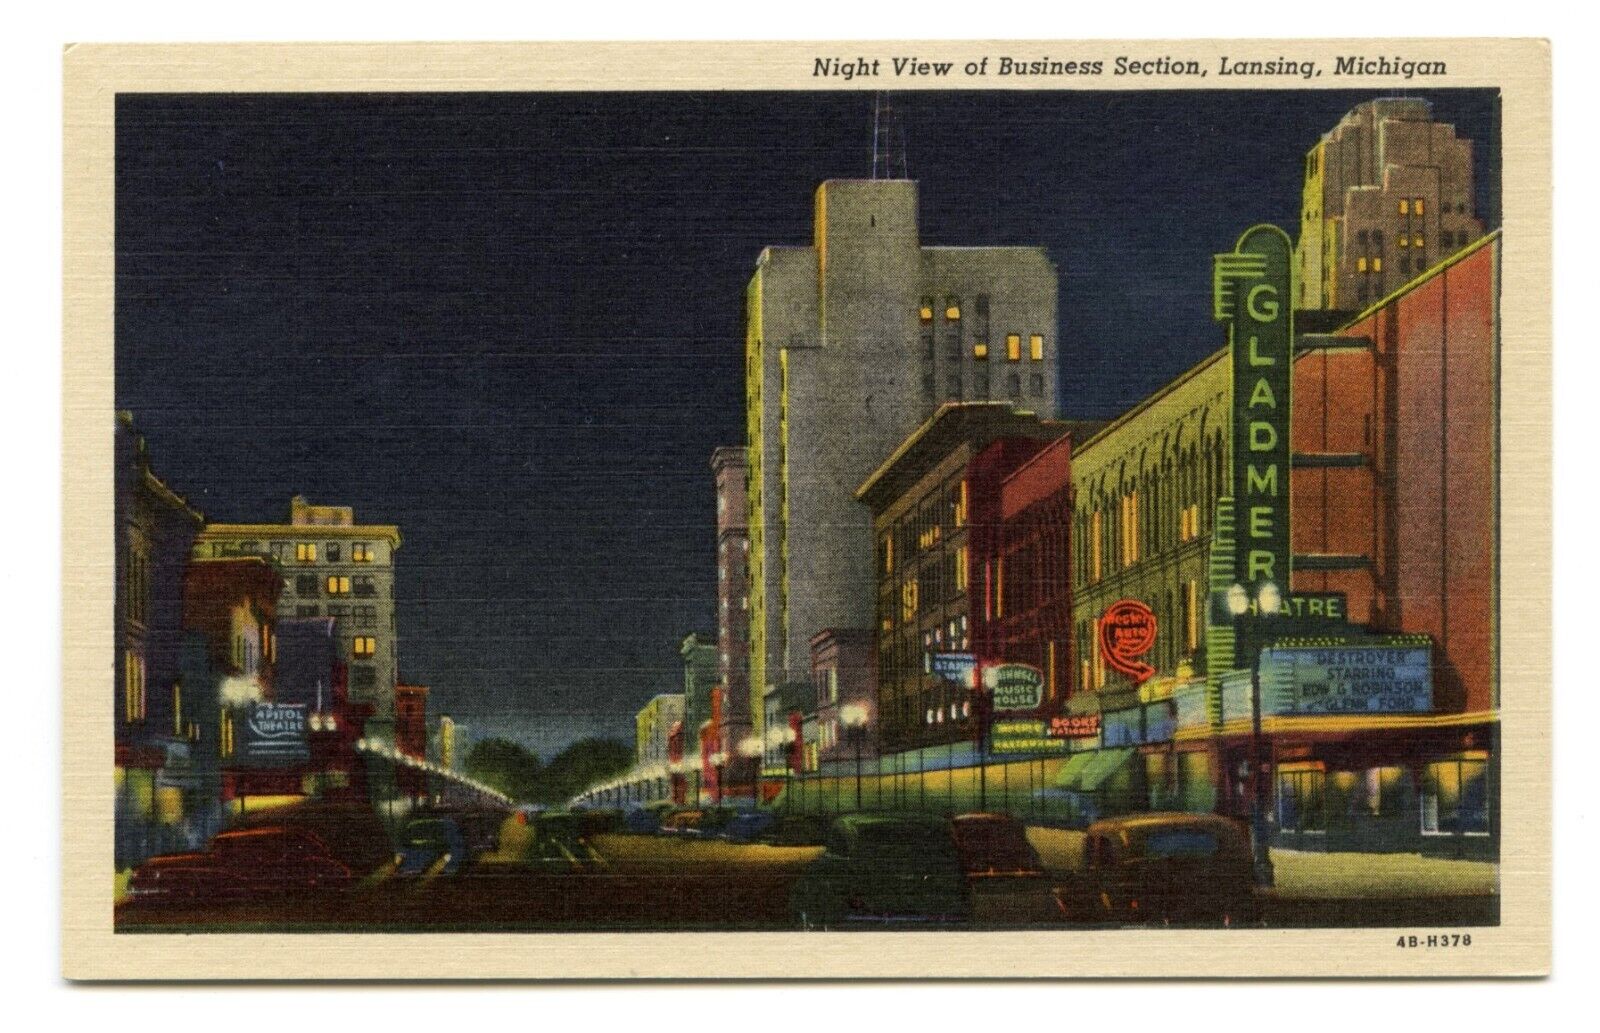 Night View Of Business Section, Lansing, Michigan- Vintage Linen Postcard 1940's